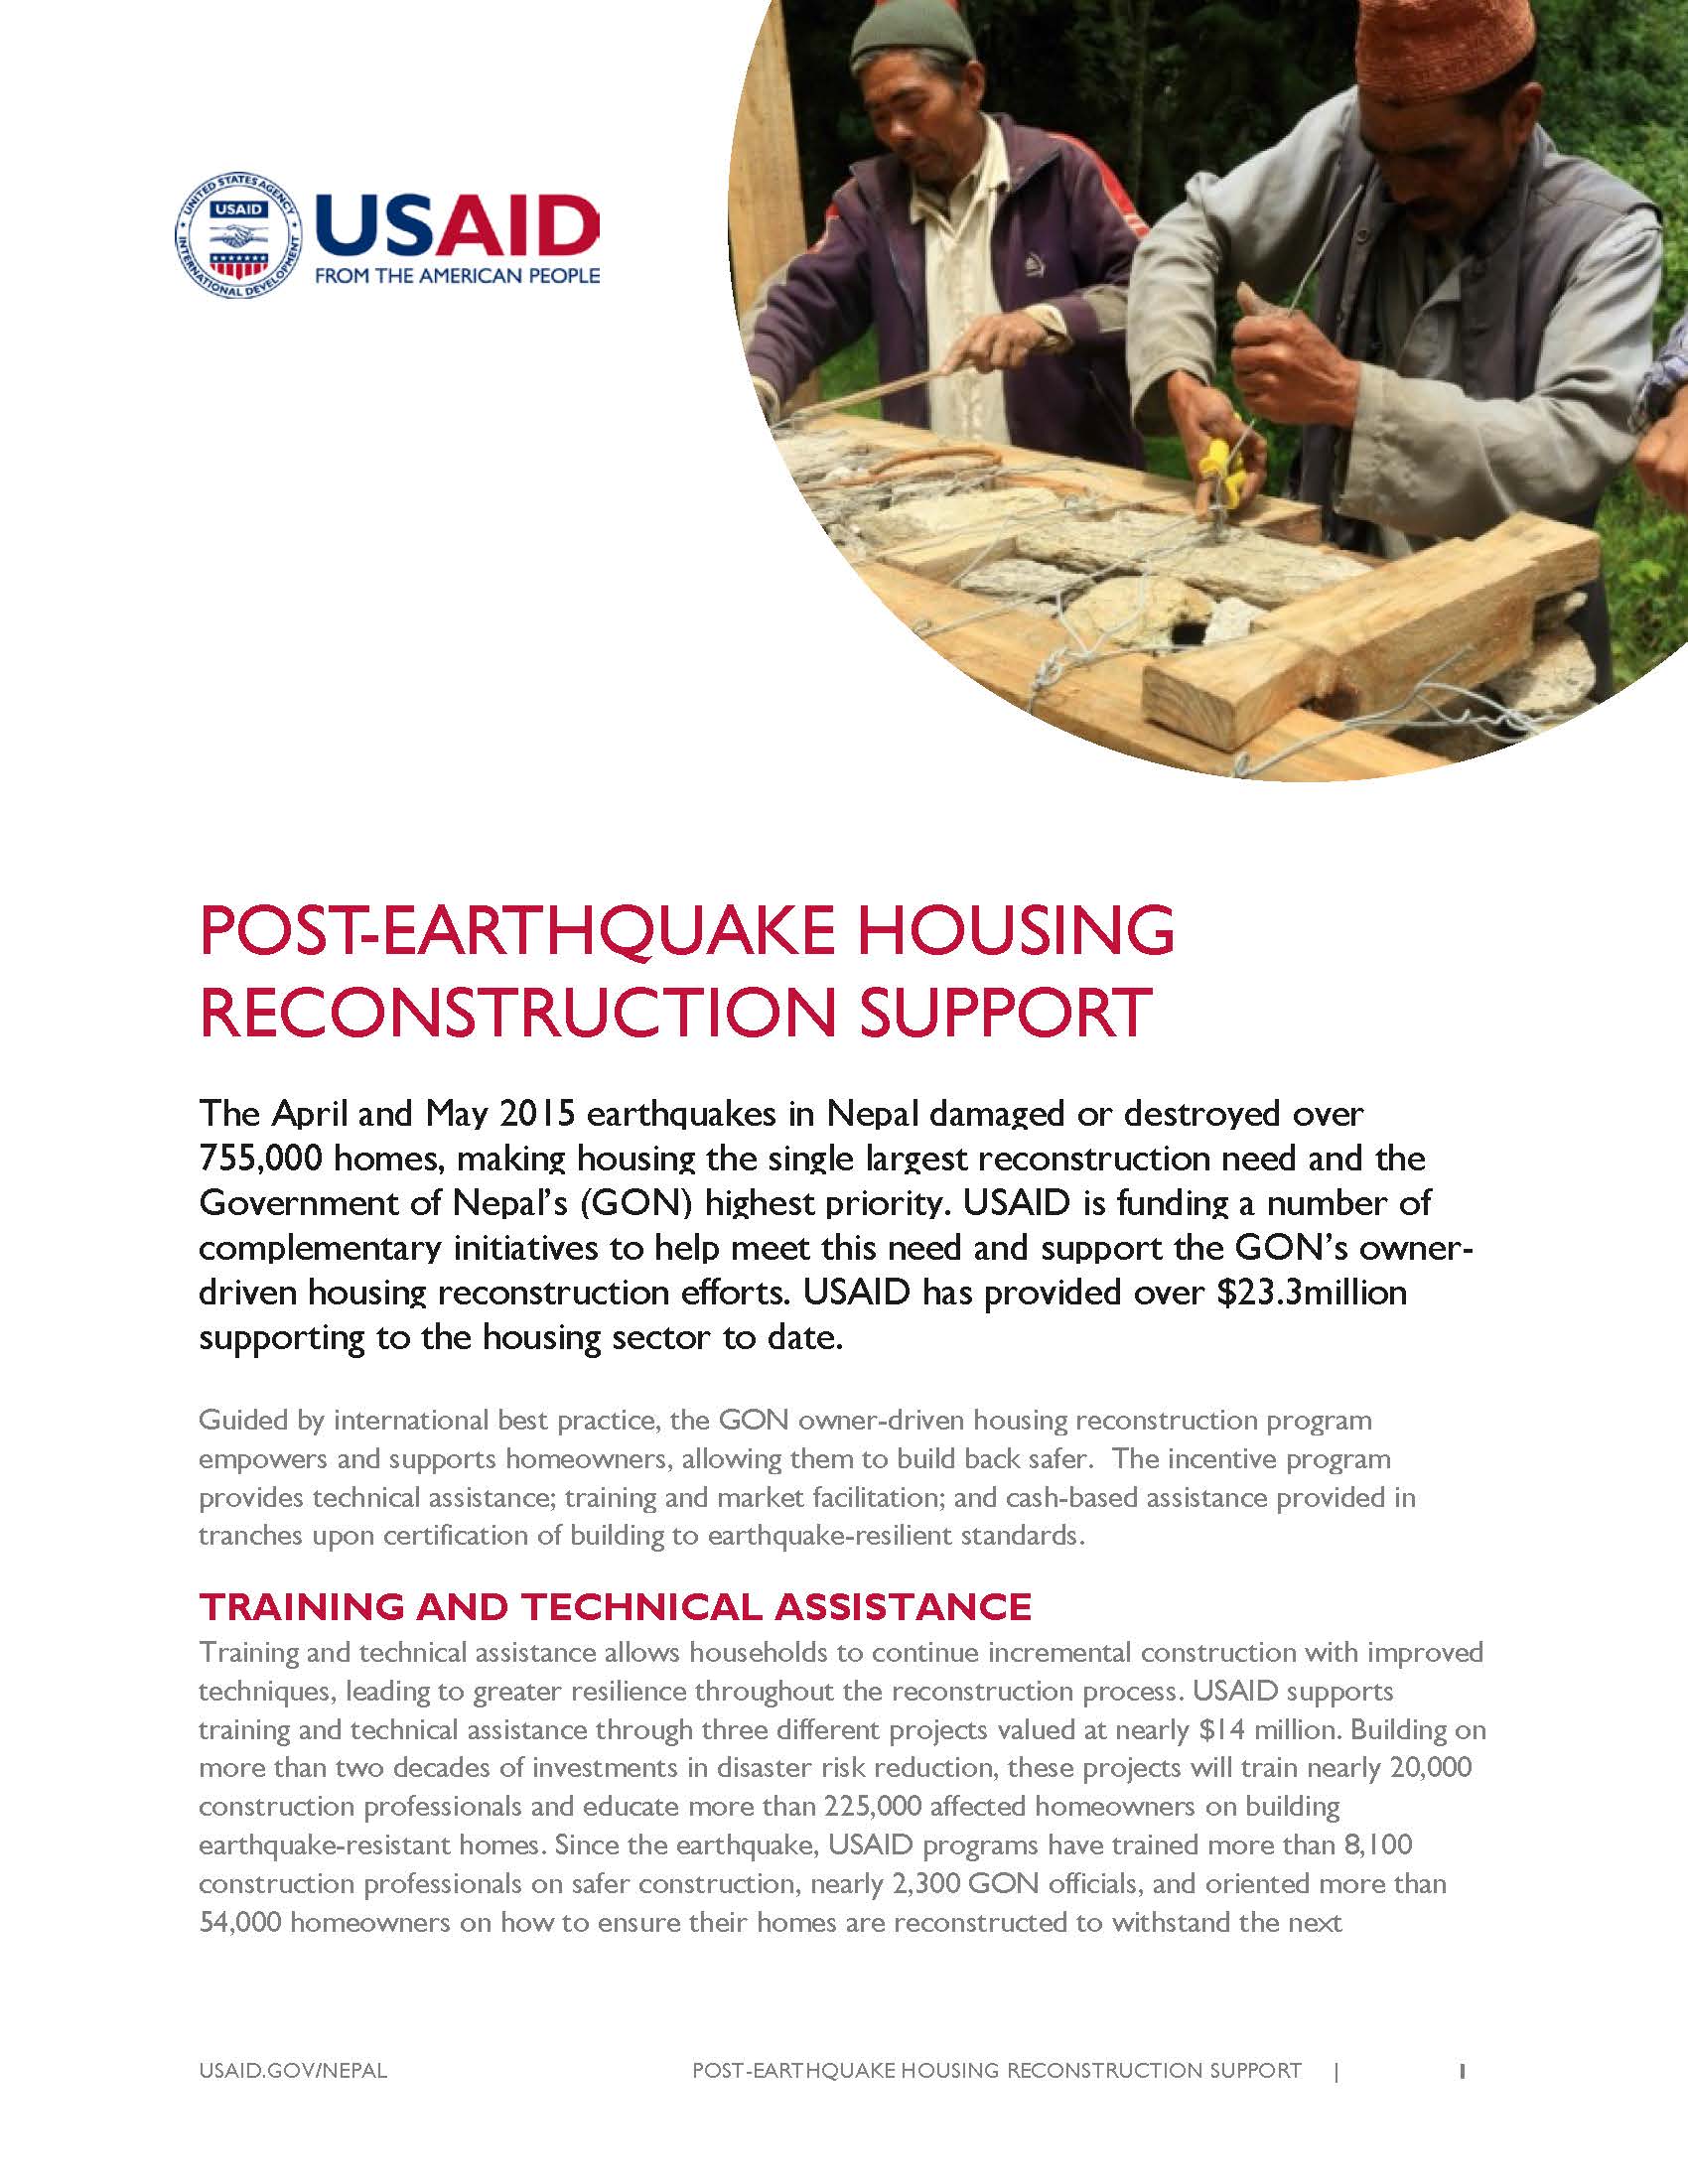 Fact Sheet: POST-EARTHQUAKE HOUSING RECONSTRUCTION SUPPORT